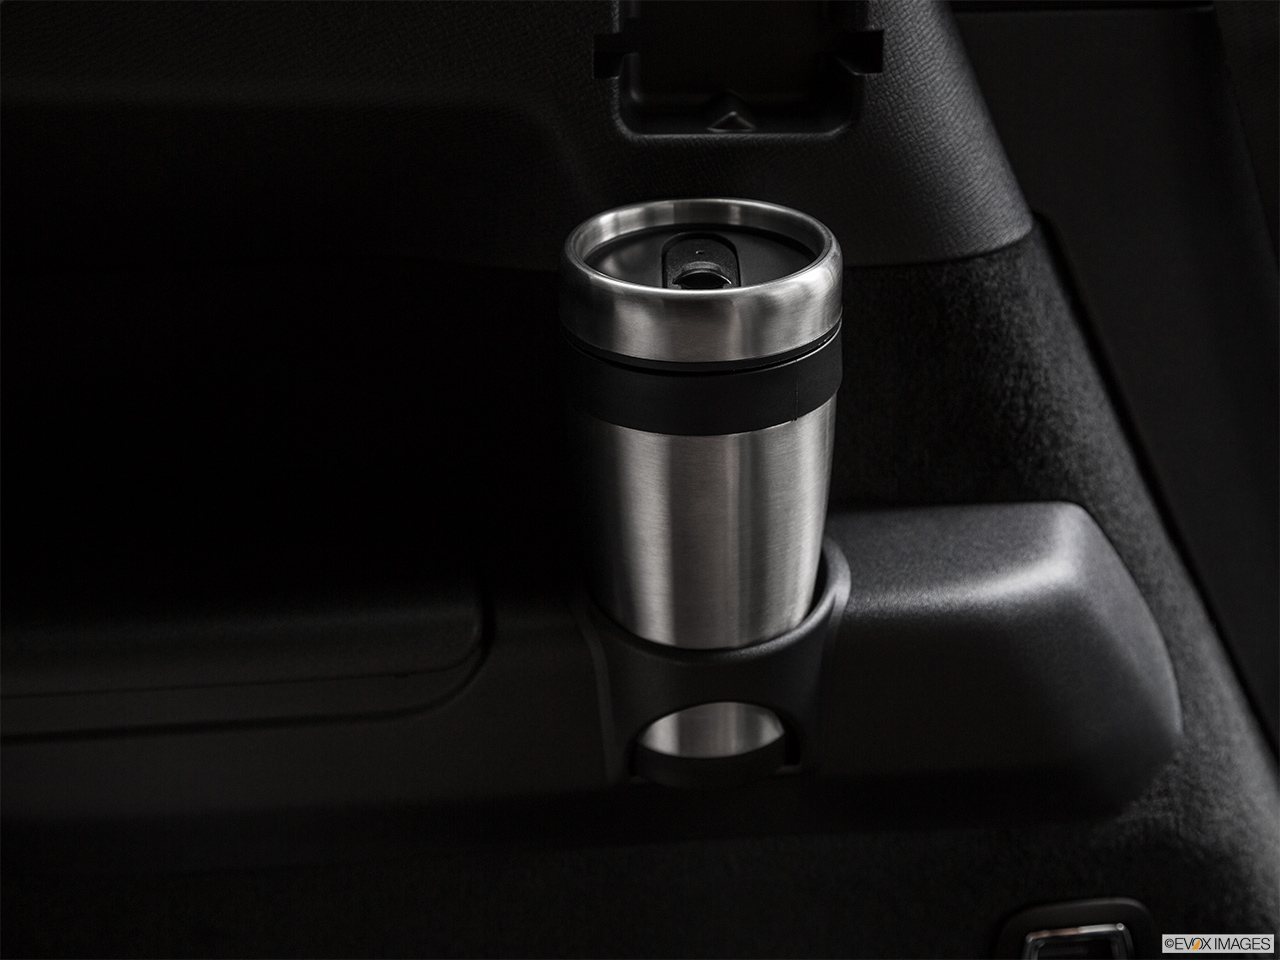 2019 Volvo XC90  T6 Inscription Third Row side cup holder with coffee prop. 